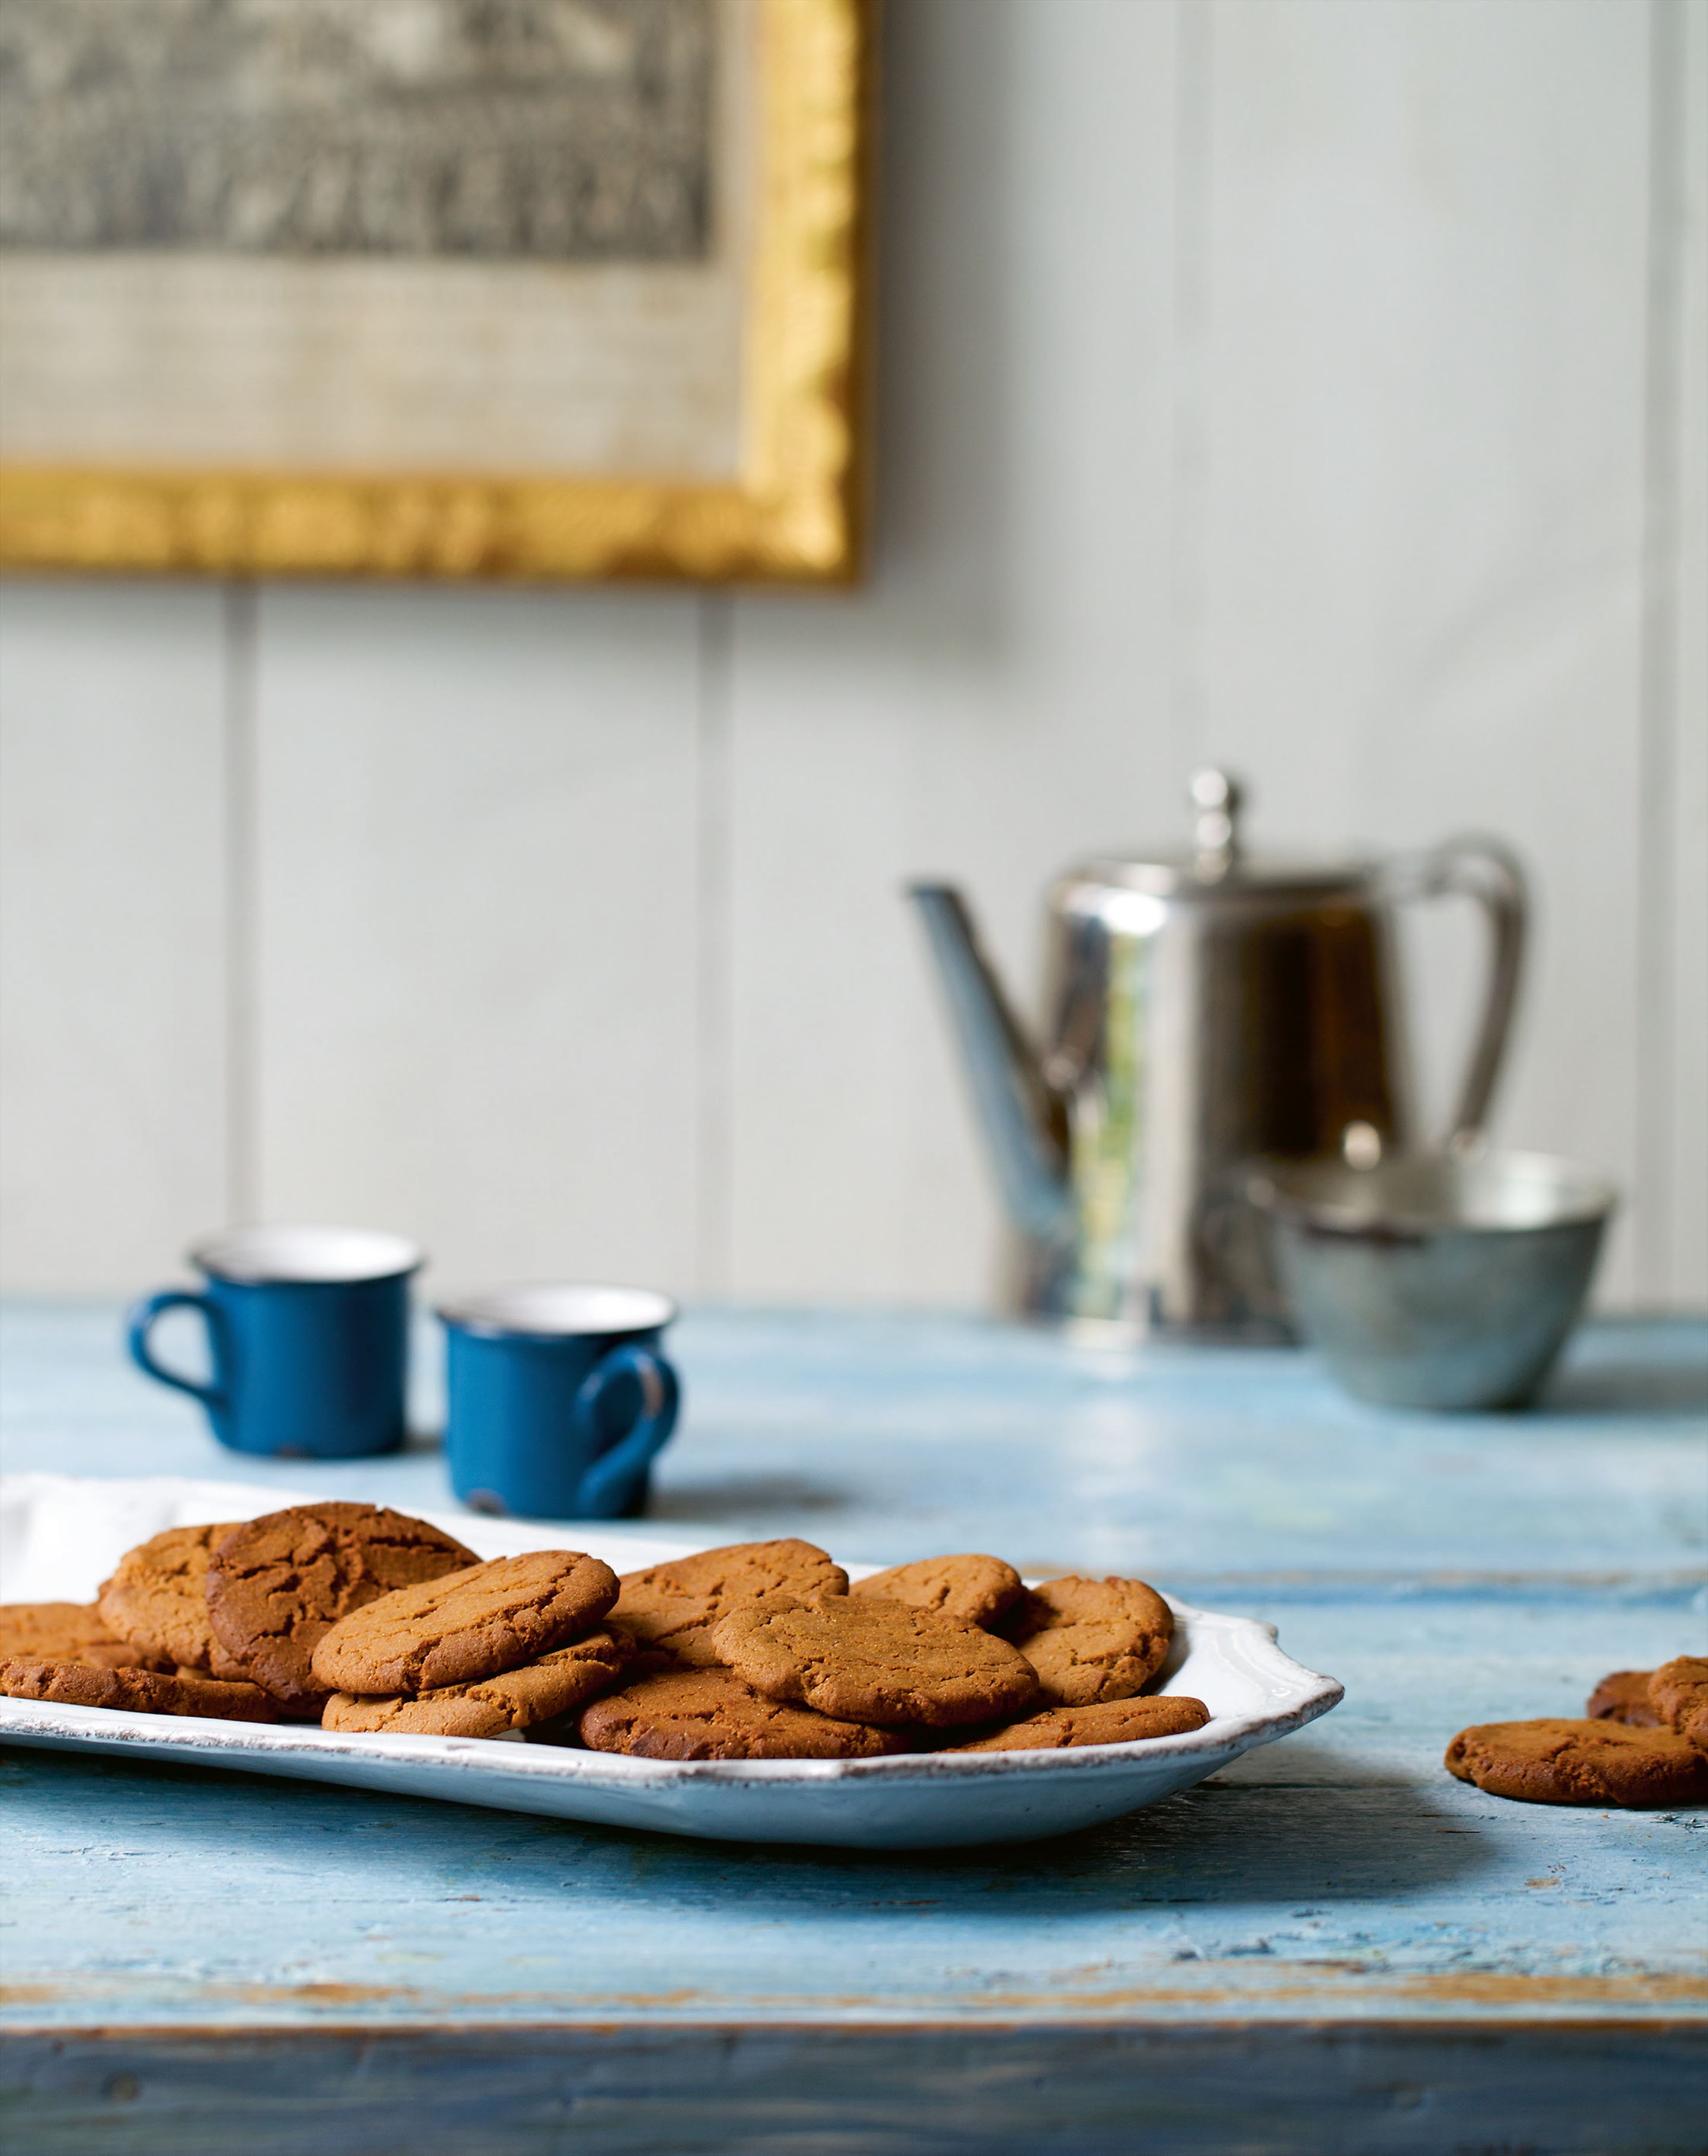 Coffee and cardamom biscuits